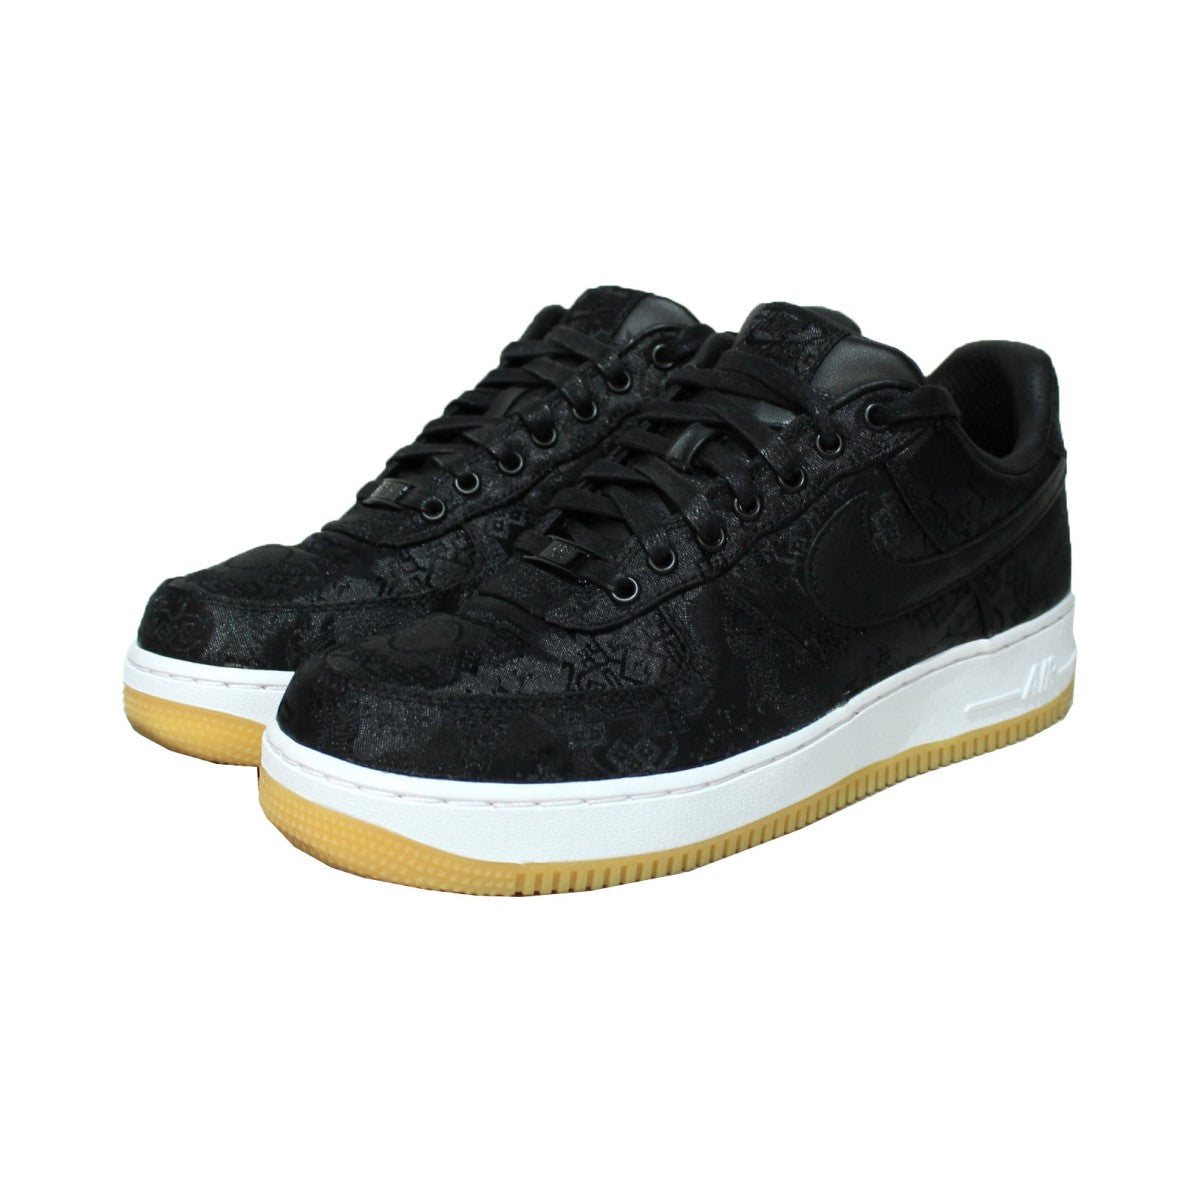 Fragment × CLOT × Nike AIR FORCE 1 LOW エアフォース ローカット